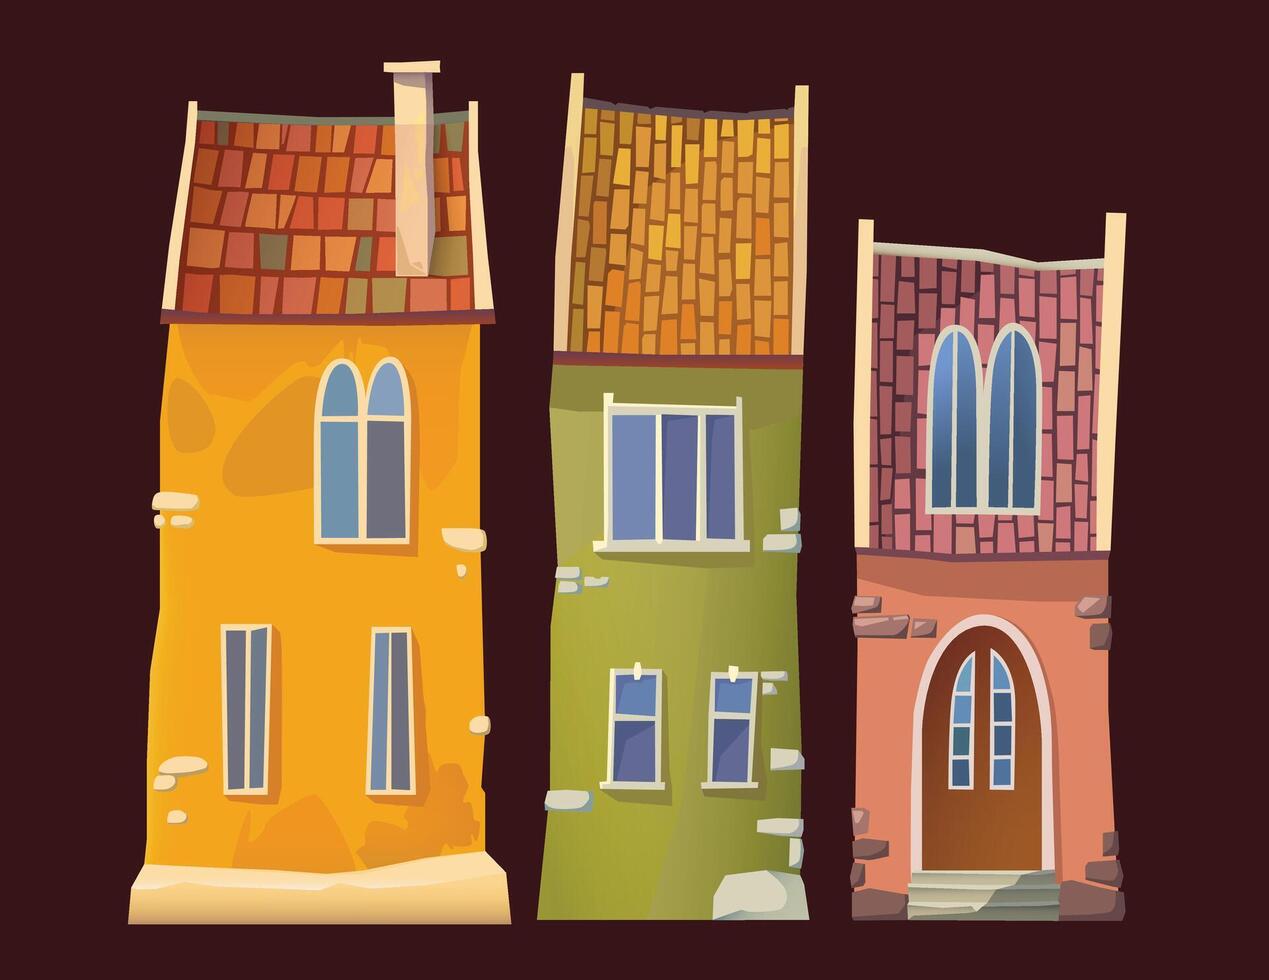 Cute tiny houses illustration set in vector. Front view houses with tall tiled roof and brick walls. Old town street view vector